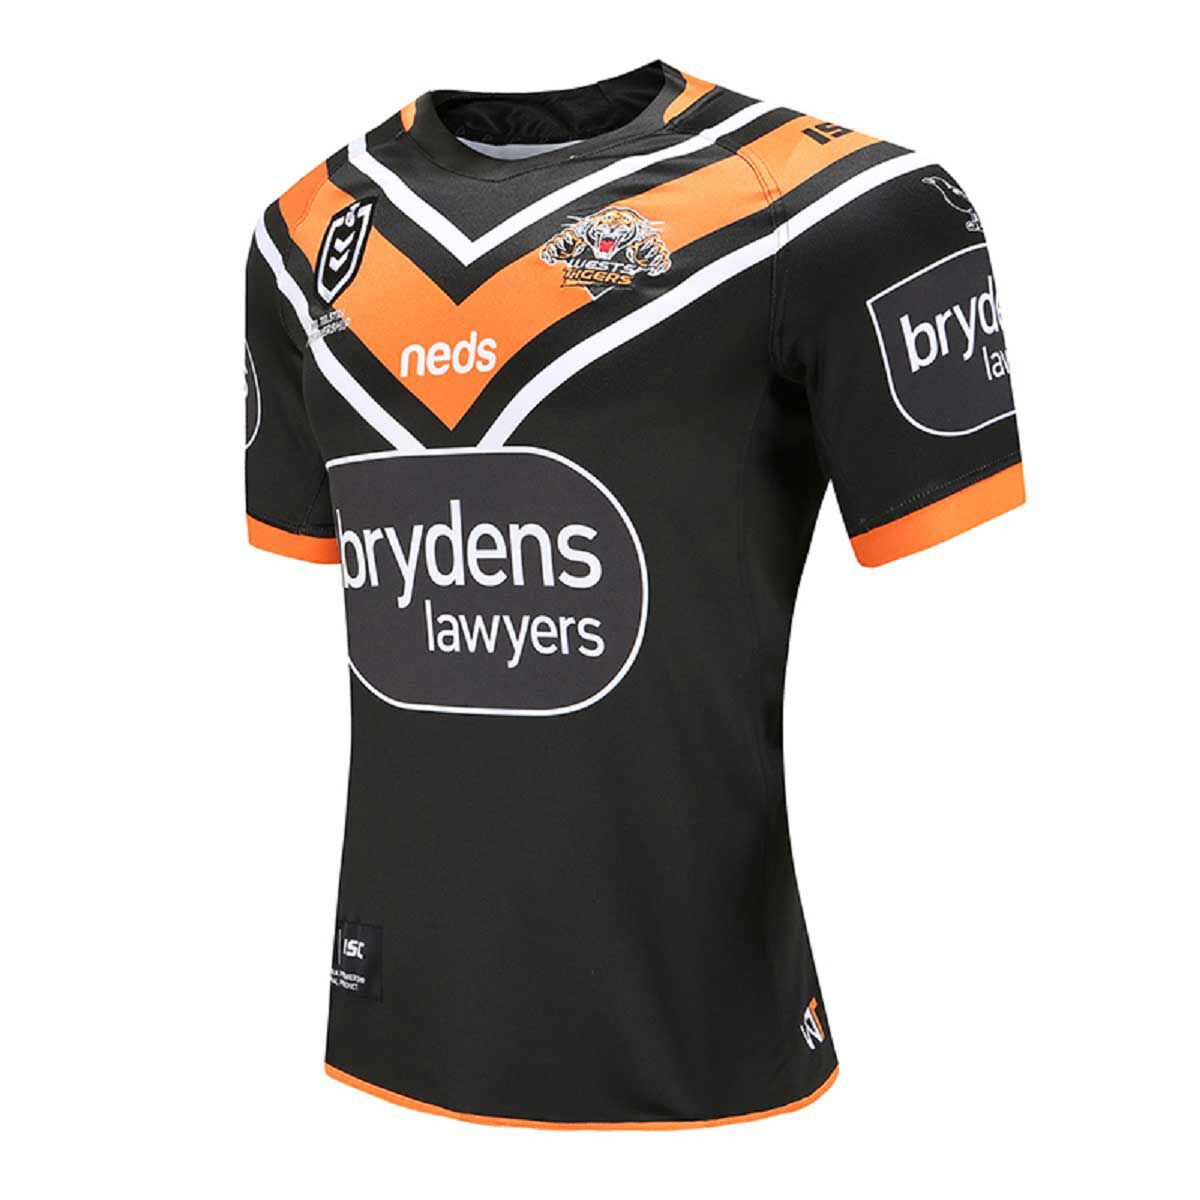 west tigers 2020 jersey